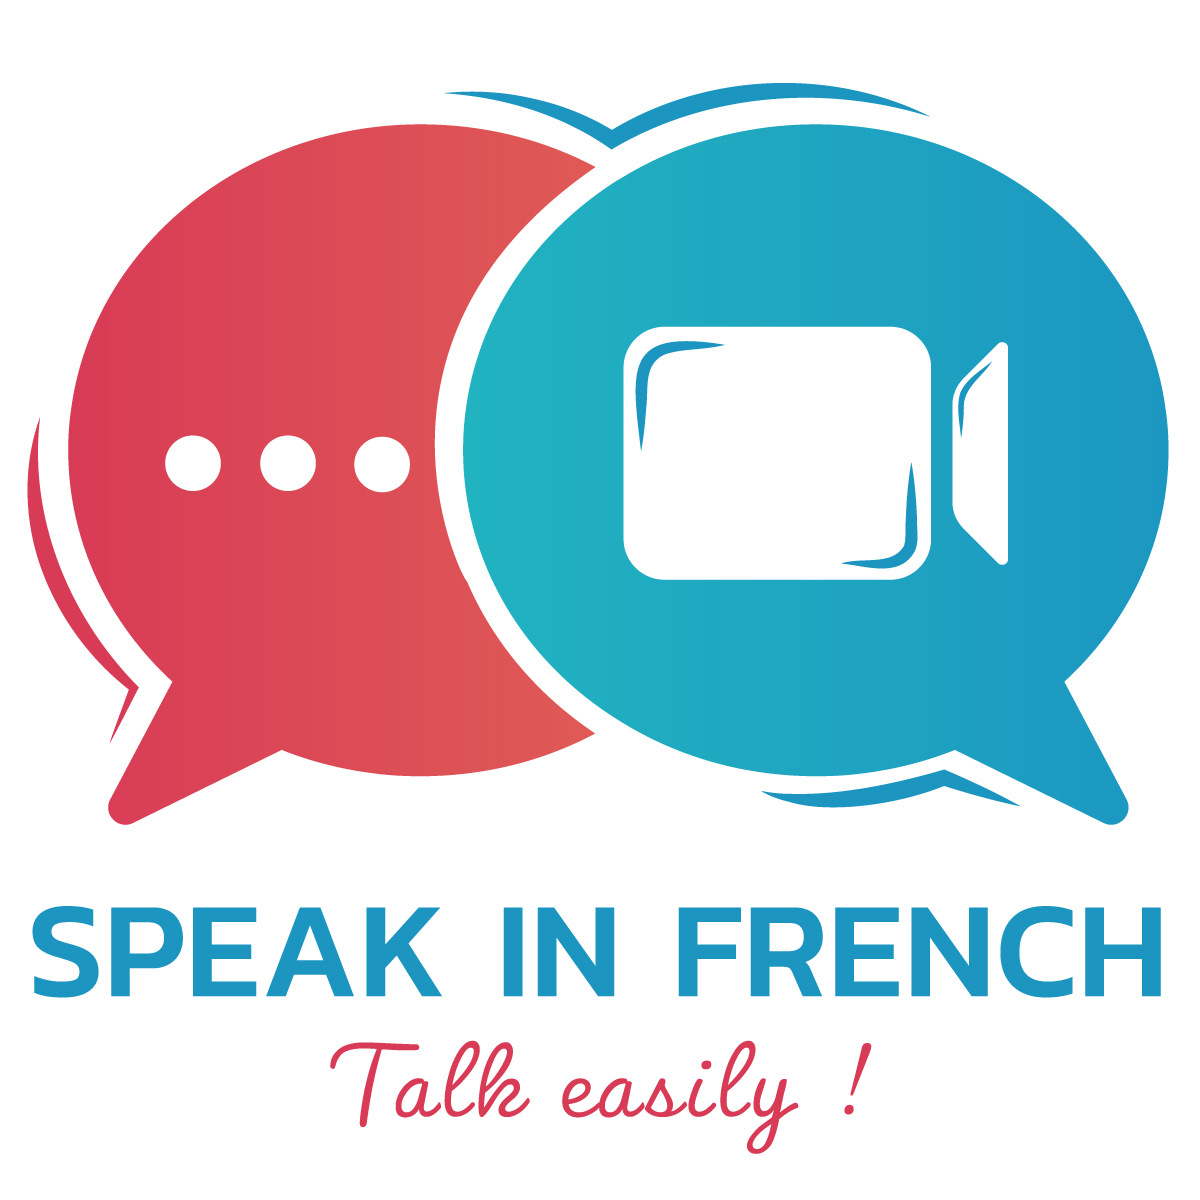 learn french,classes,Online French course,jérôme Sintes,a stay with your teacher,private lesson,speak French fluently,speaking French well,host family,French level test,courses in france